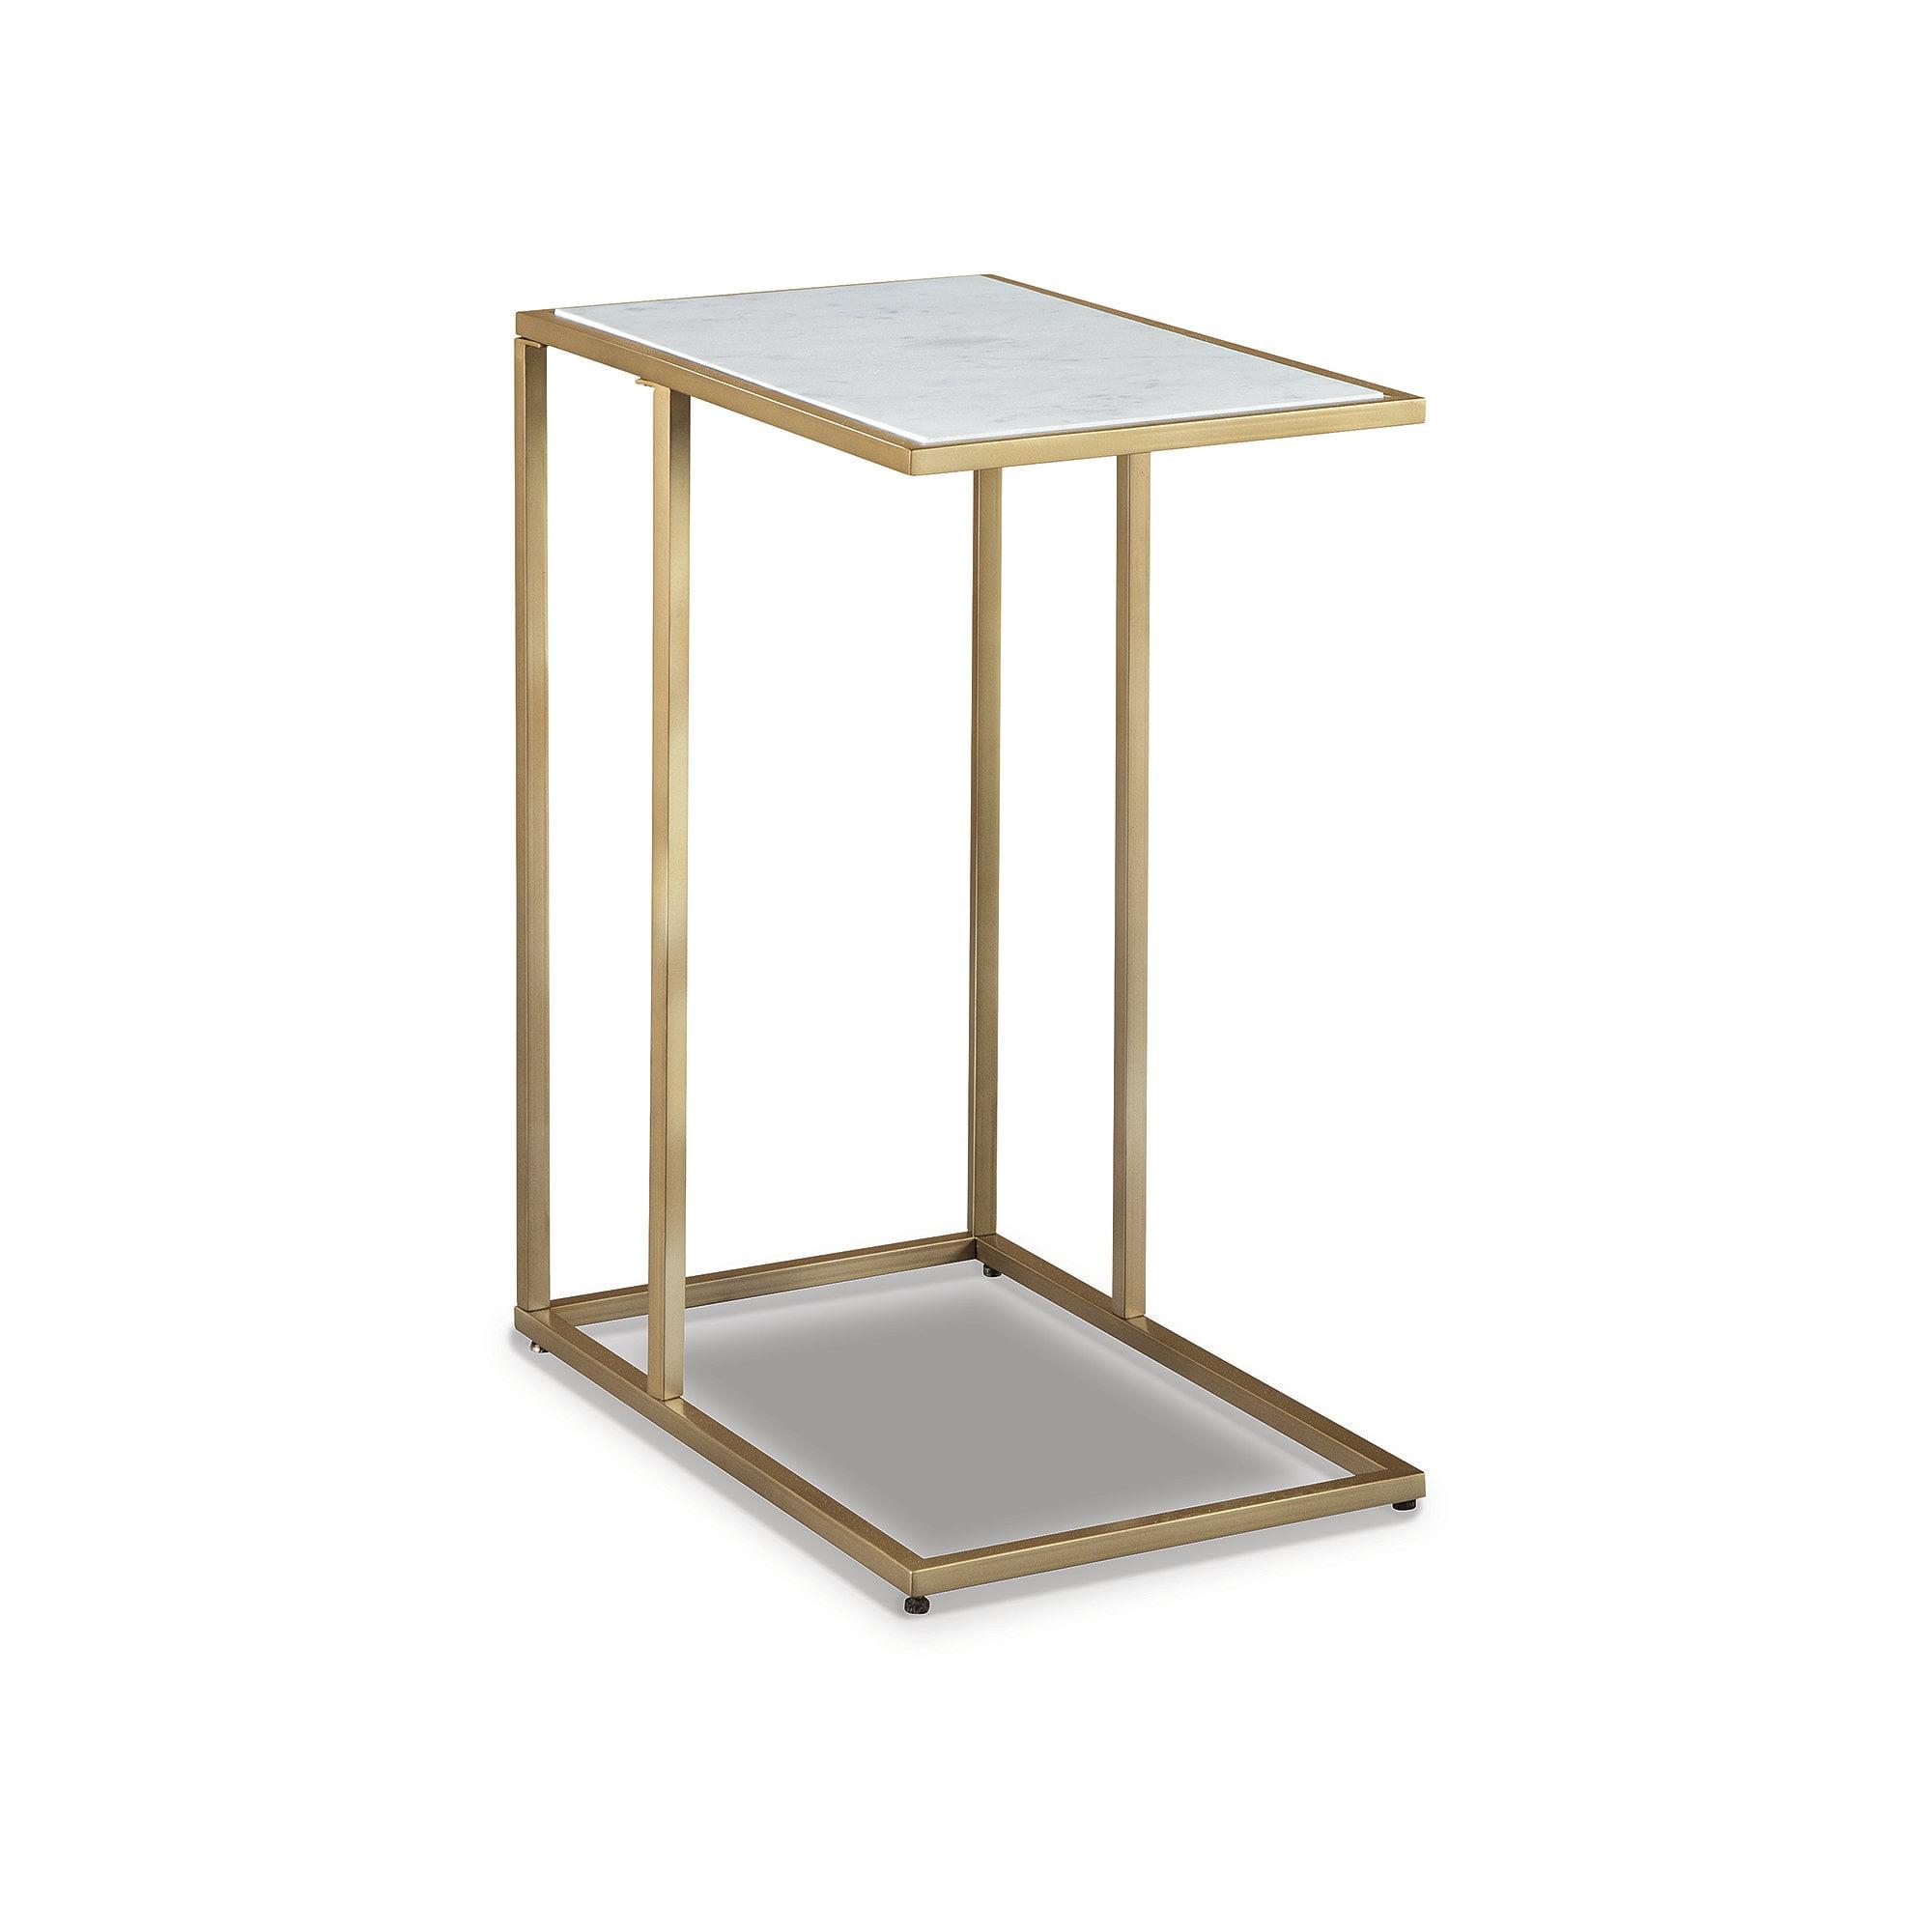 Gold and White Marble Rectangular C-Shaped Accent Table